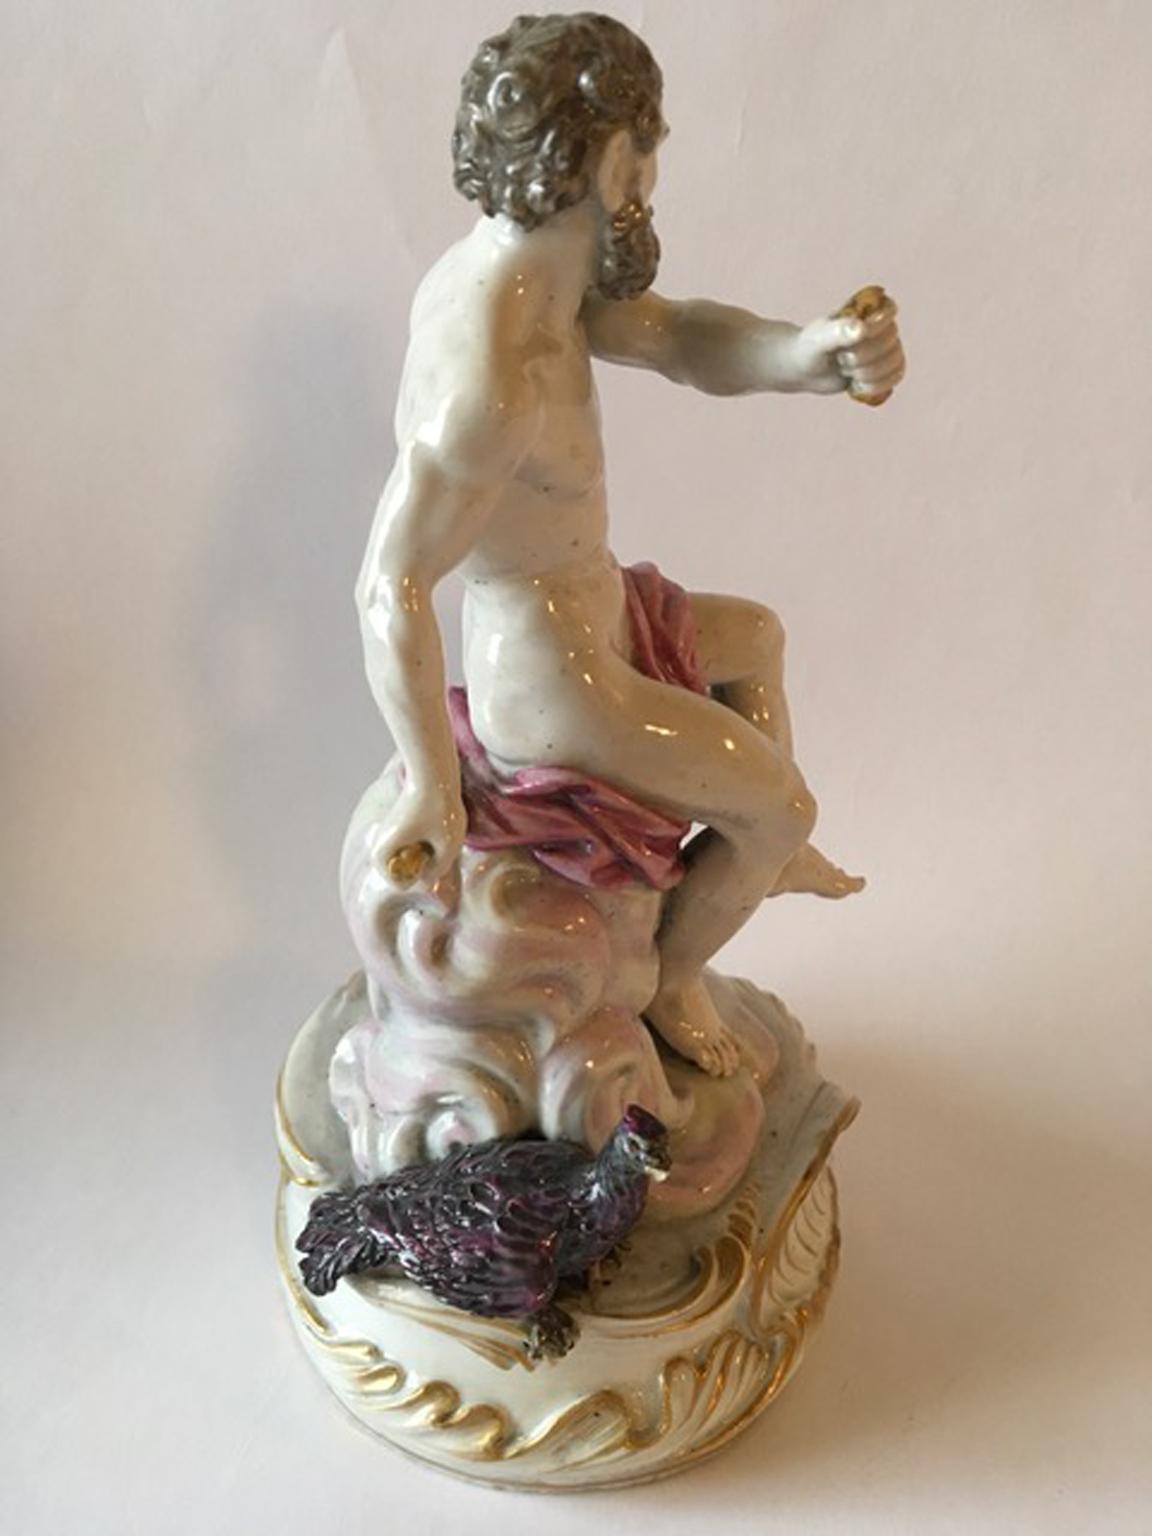 Elegant 18th century porcelain figurine of Giove, attribuited to Meissen. As to put in evidence the armony and beauty of colors.
With certificate of authenticity.